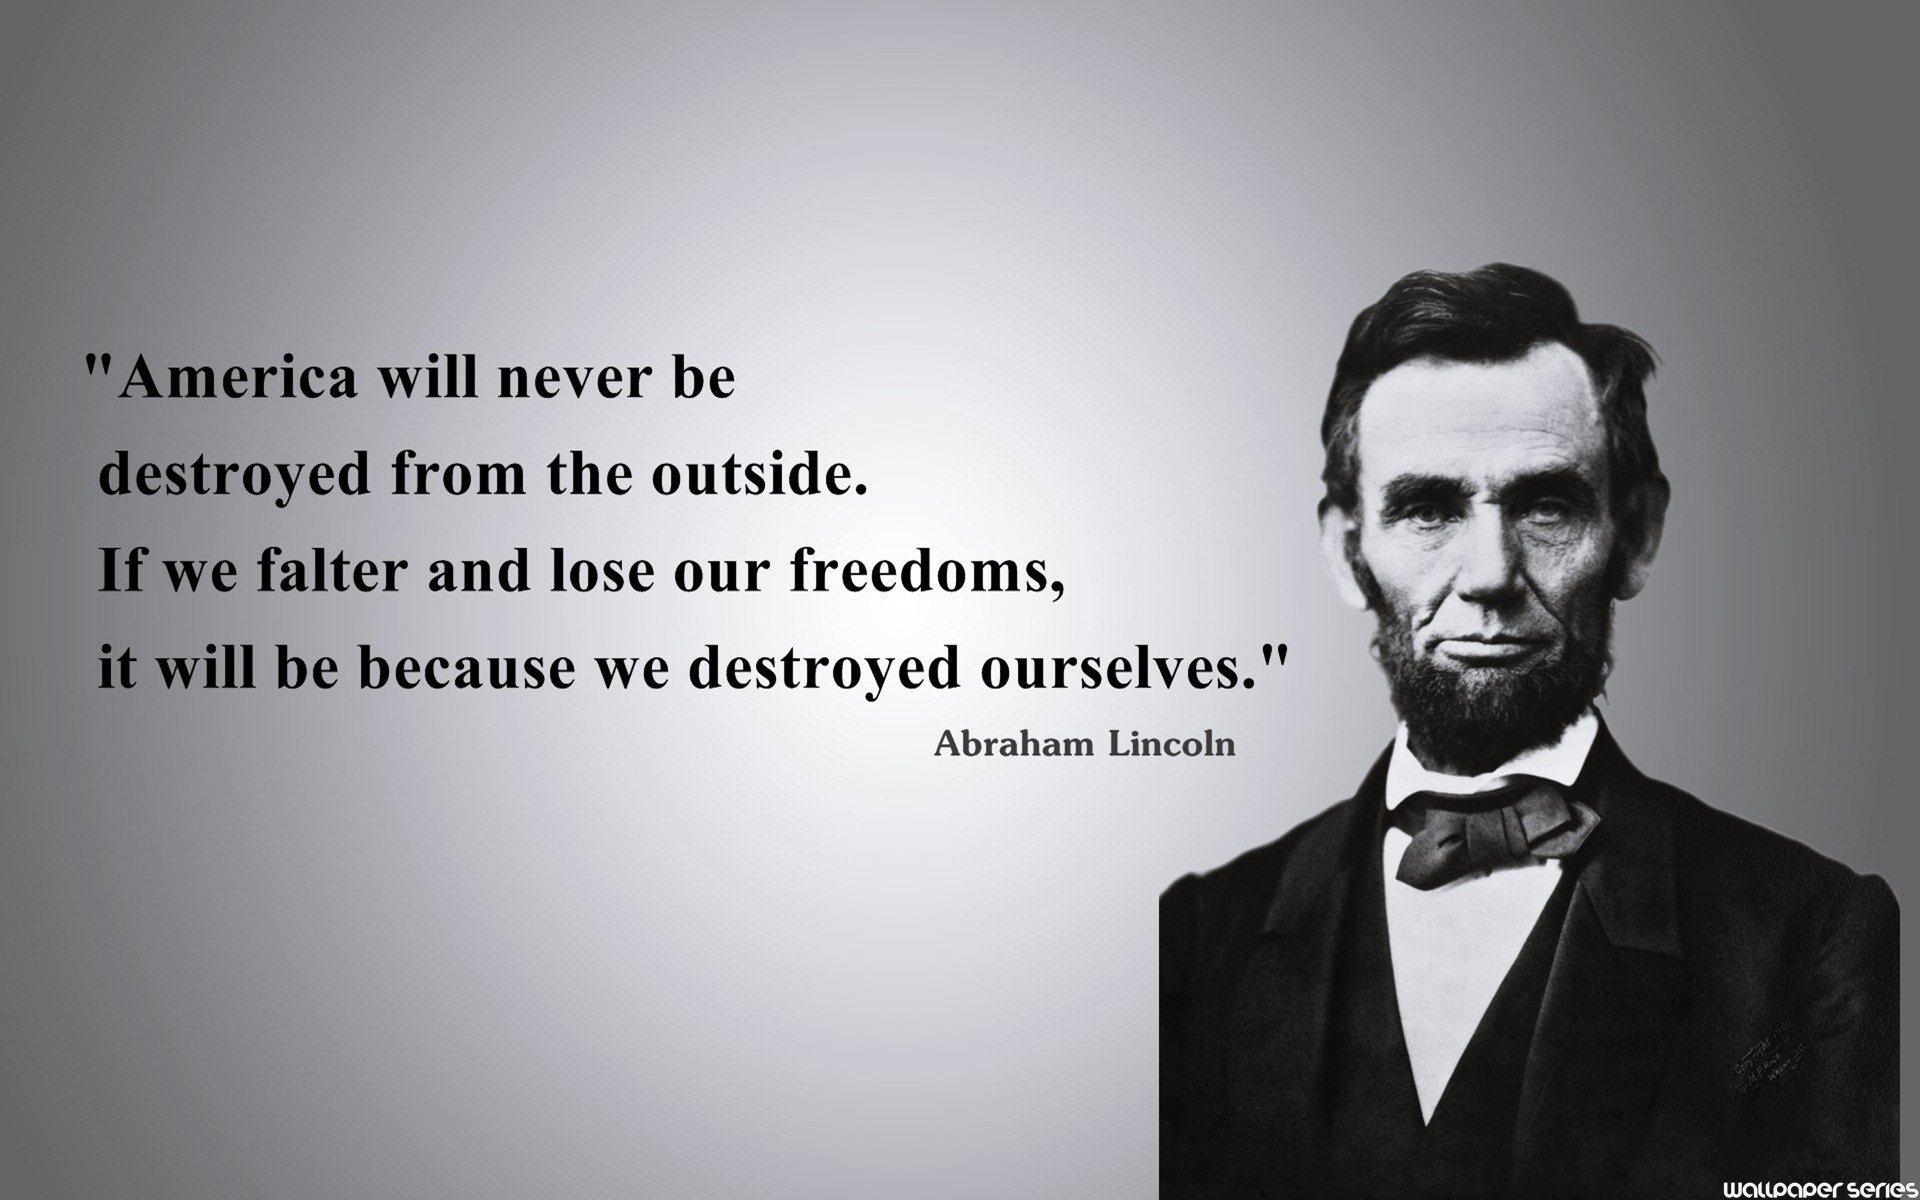 Pack.558: Abraham Lincoln Wallpaper 1920x1200 px